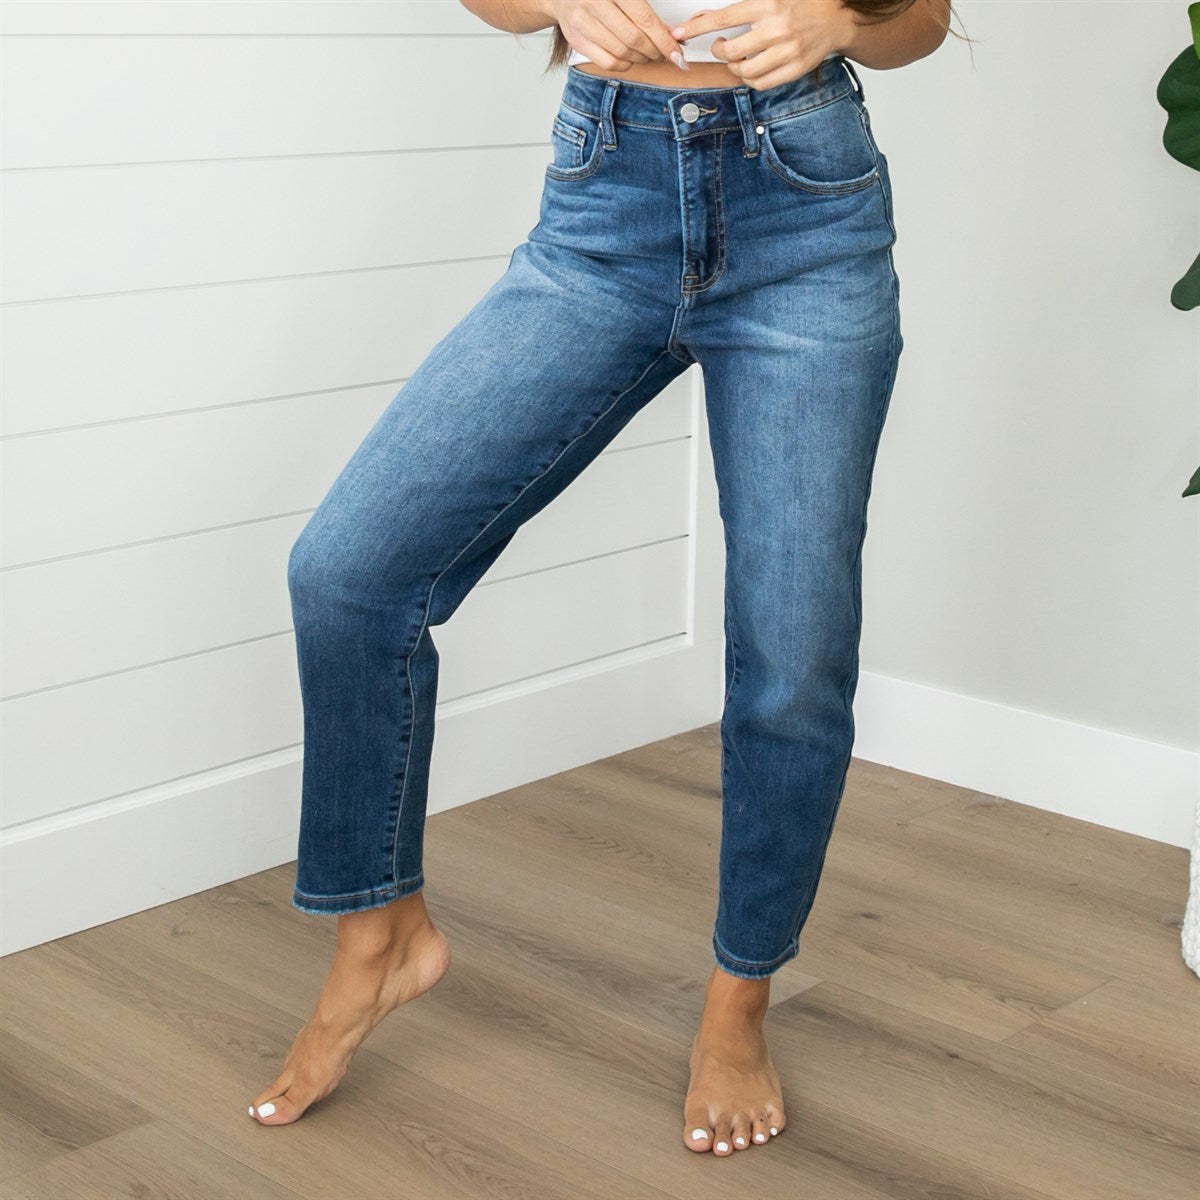 Women's Jeans: Wide, High Waist, Skinny, Low Waist and more | OVS